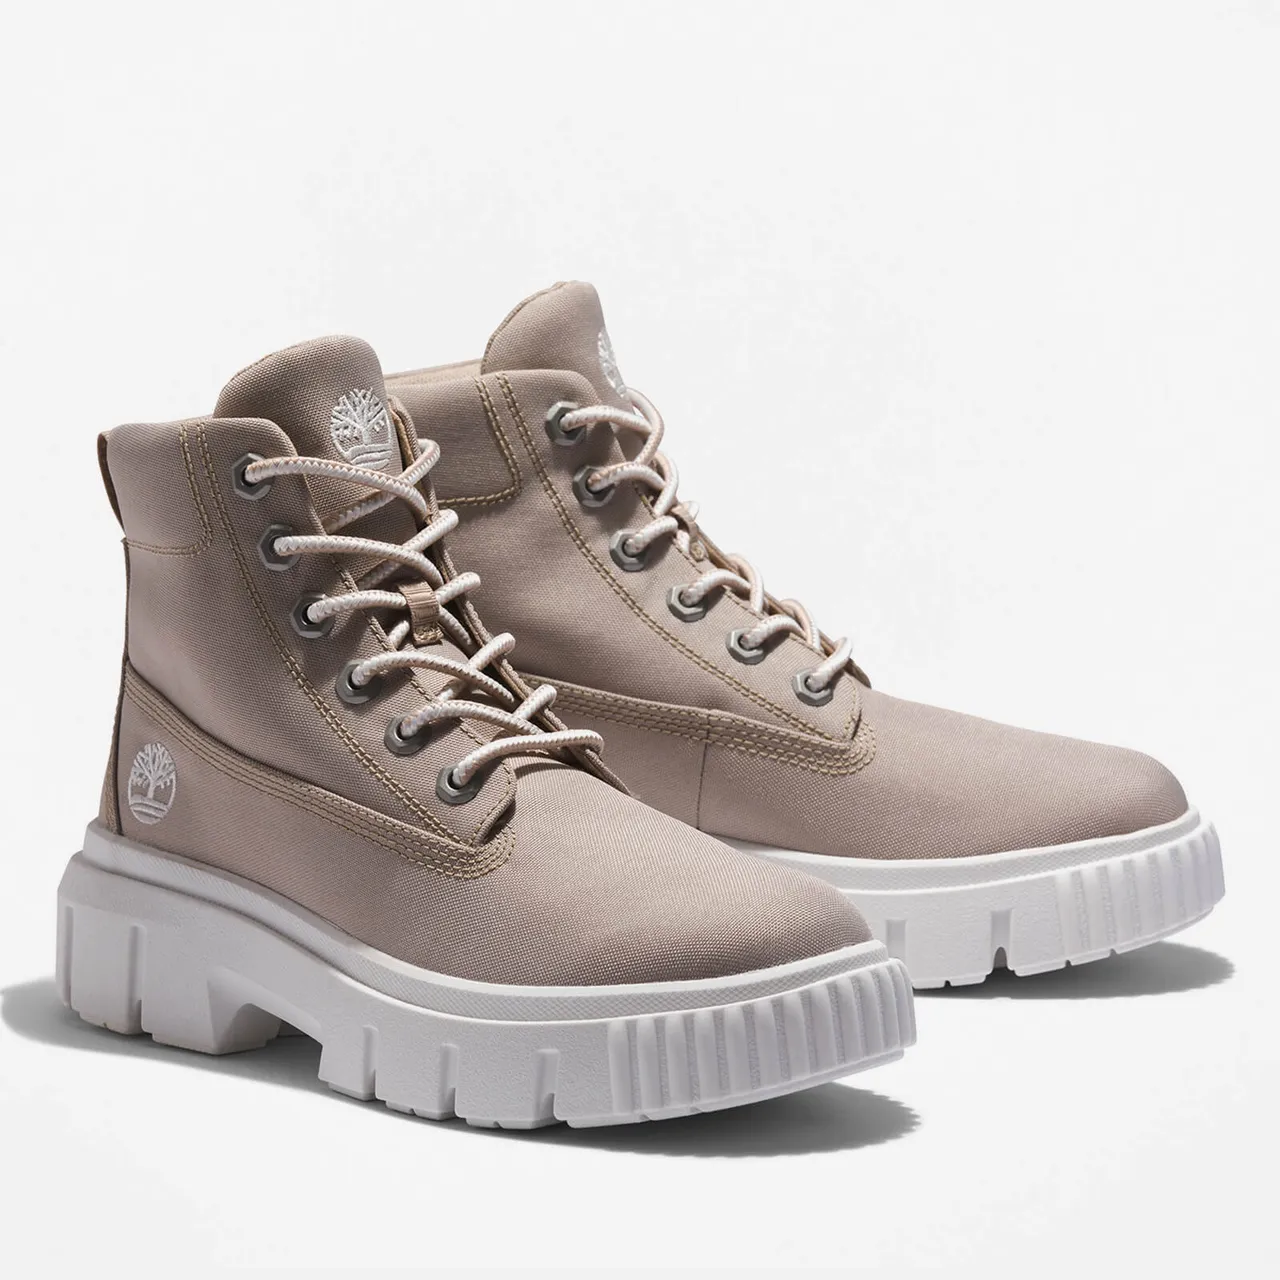 Timberland Women's Greyfield Canvas Boots - UK